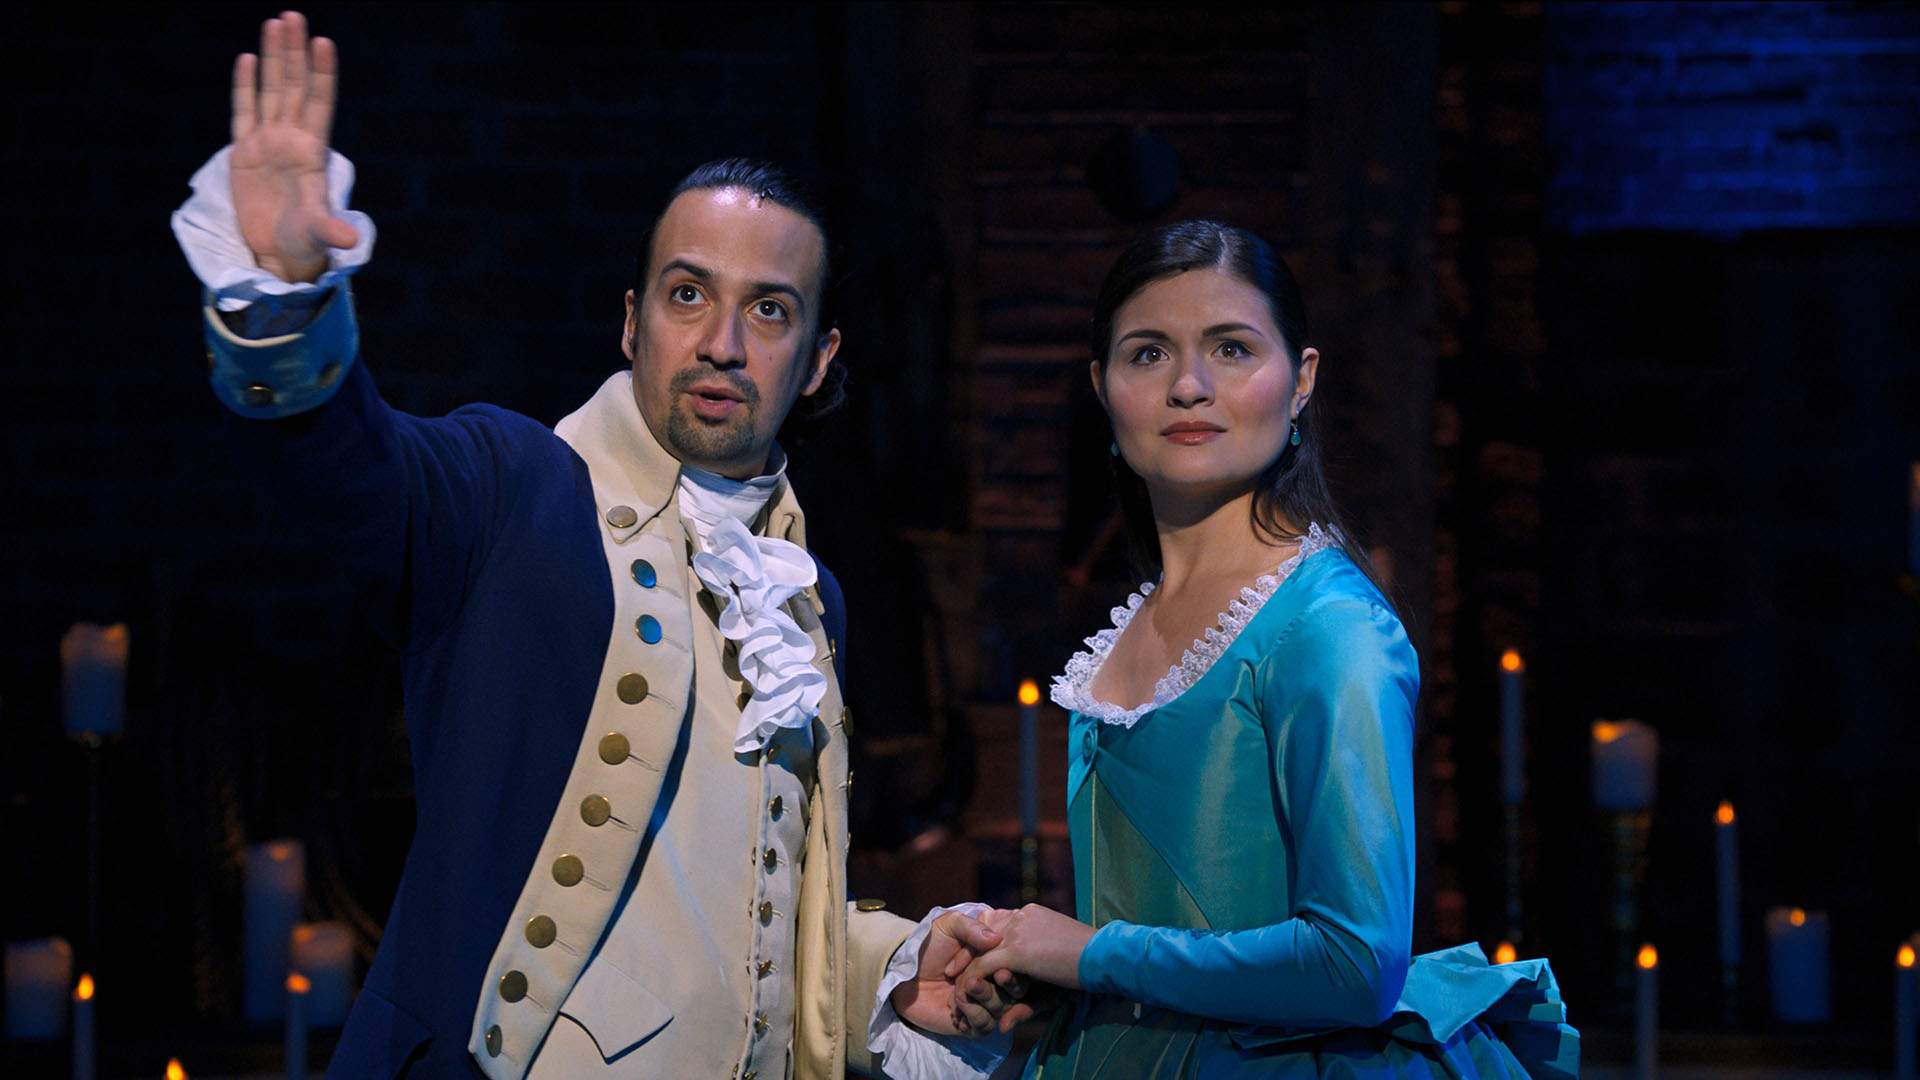 Lin-Manuel Miranda Is Coming to Brisbane to Be in the Room Where a 'Hamilton' Fan Event Happens